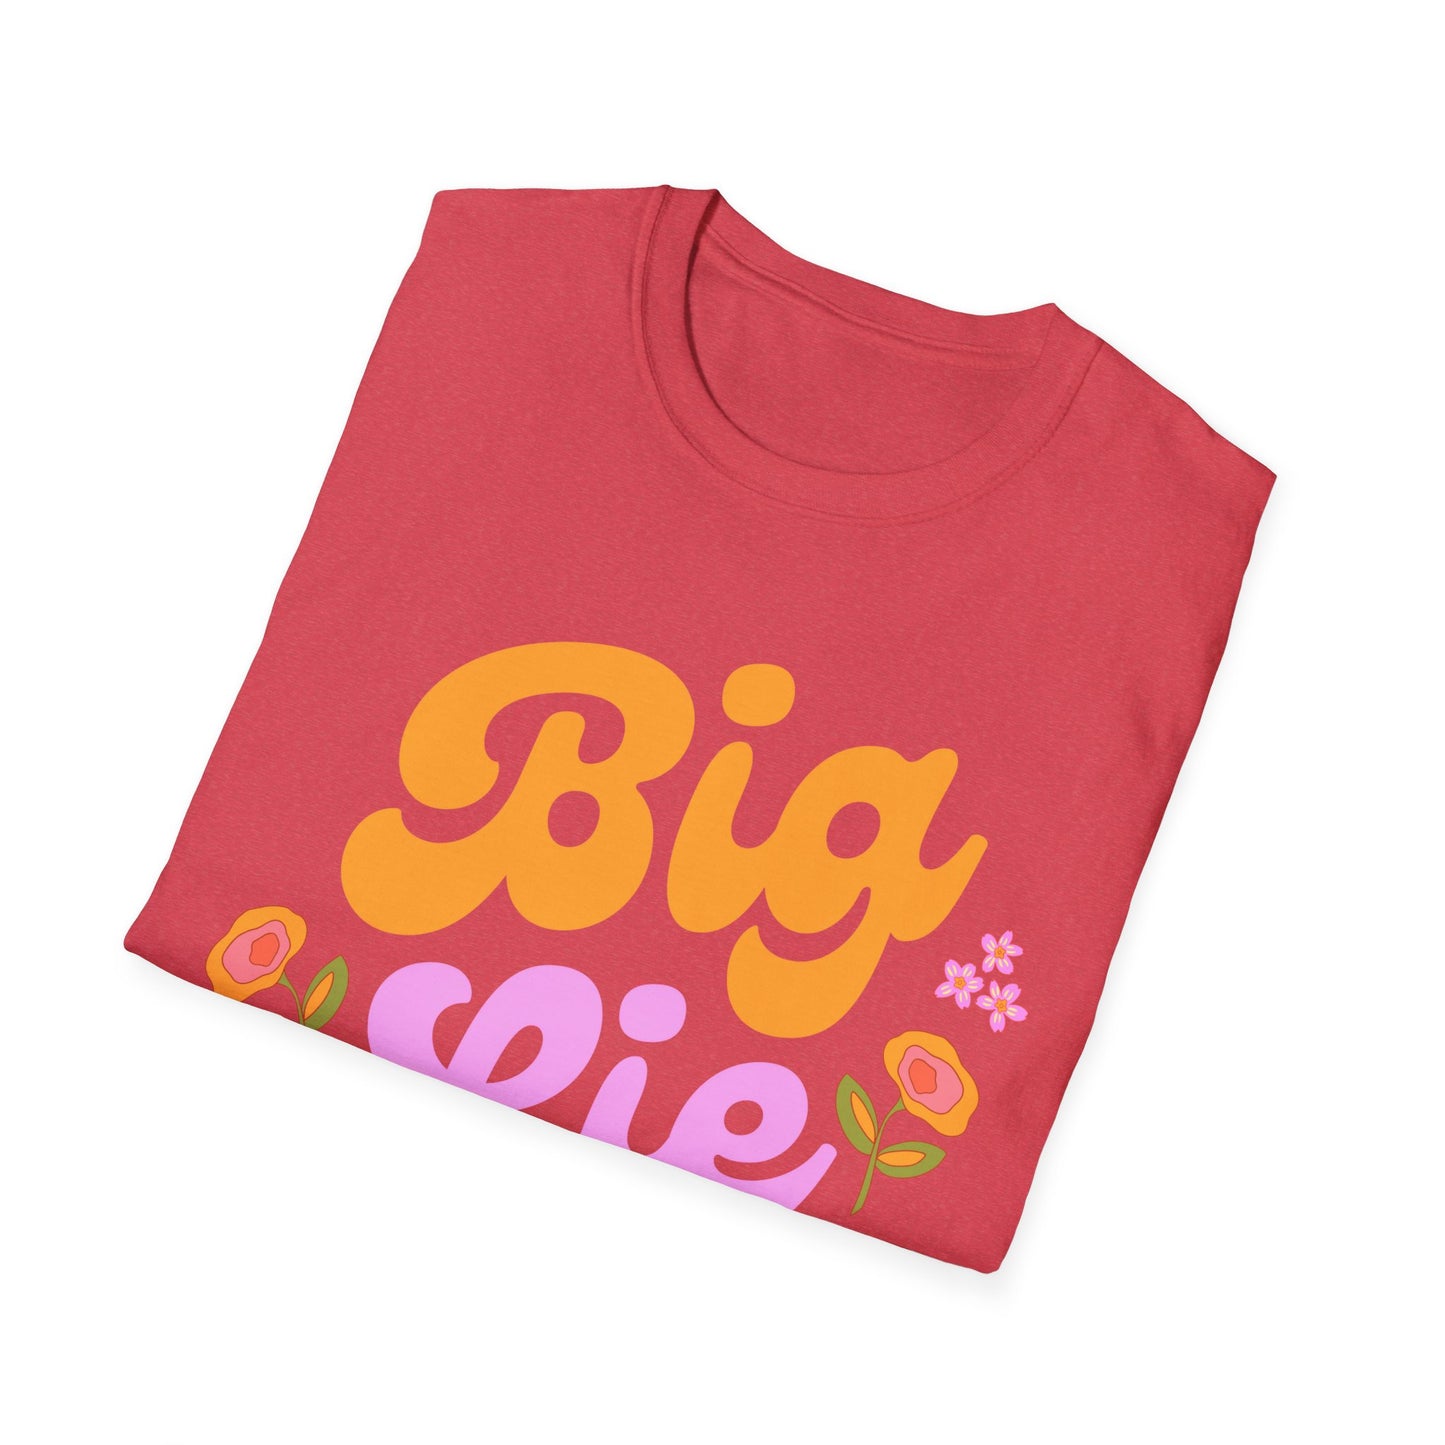 Big Lie! Bold Statement Soft Style t-shirt: You know and I know He did it! Don't let anyone forget it!